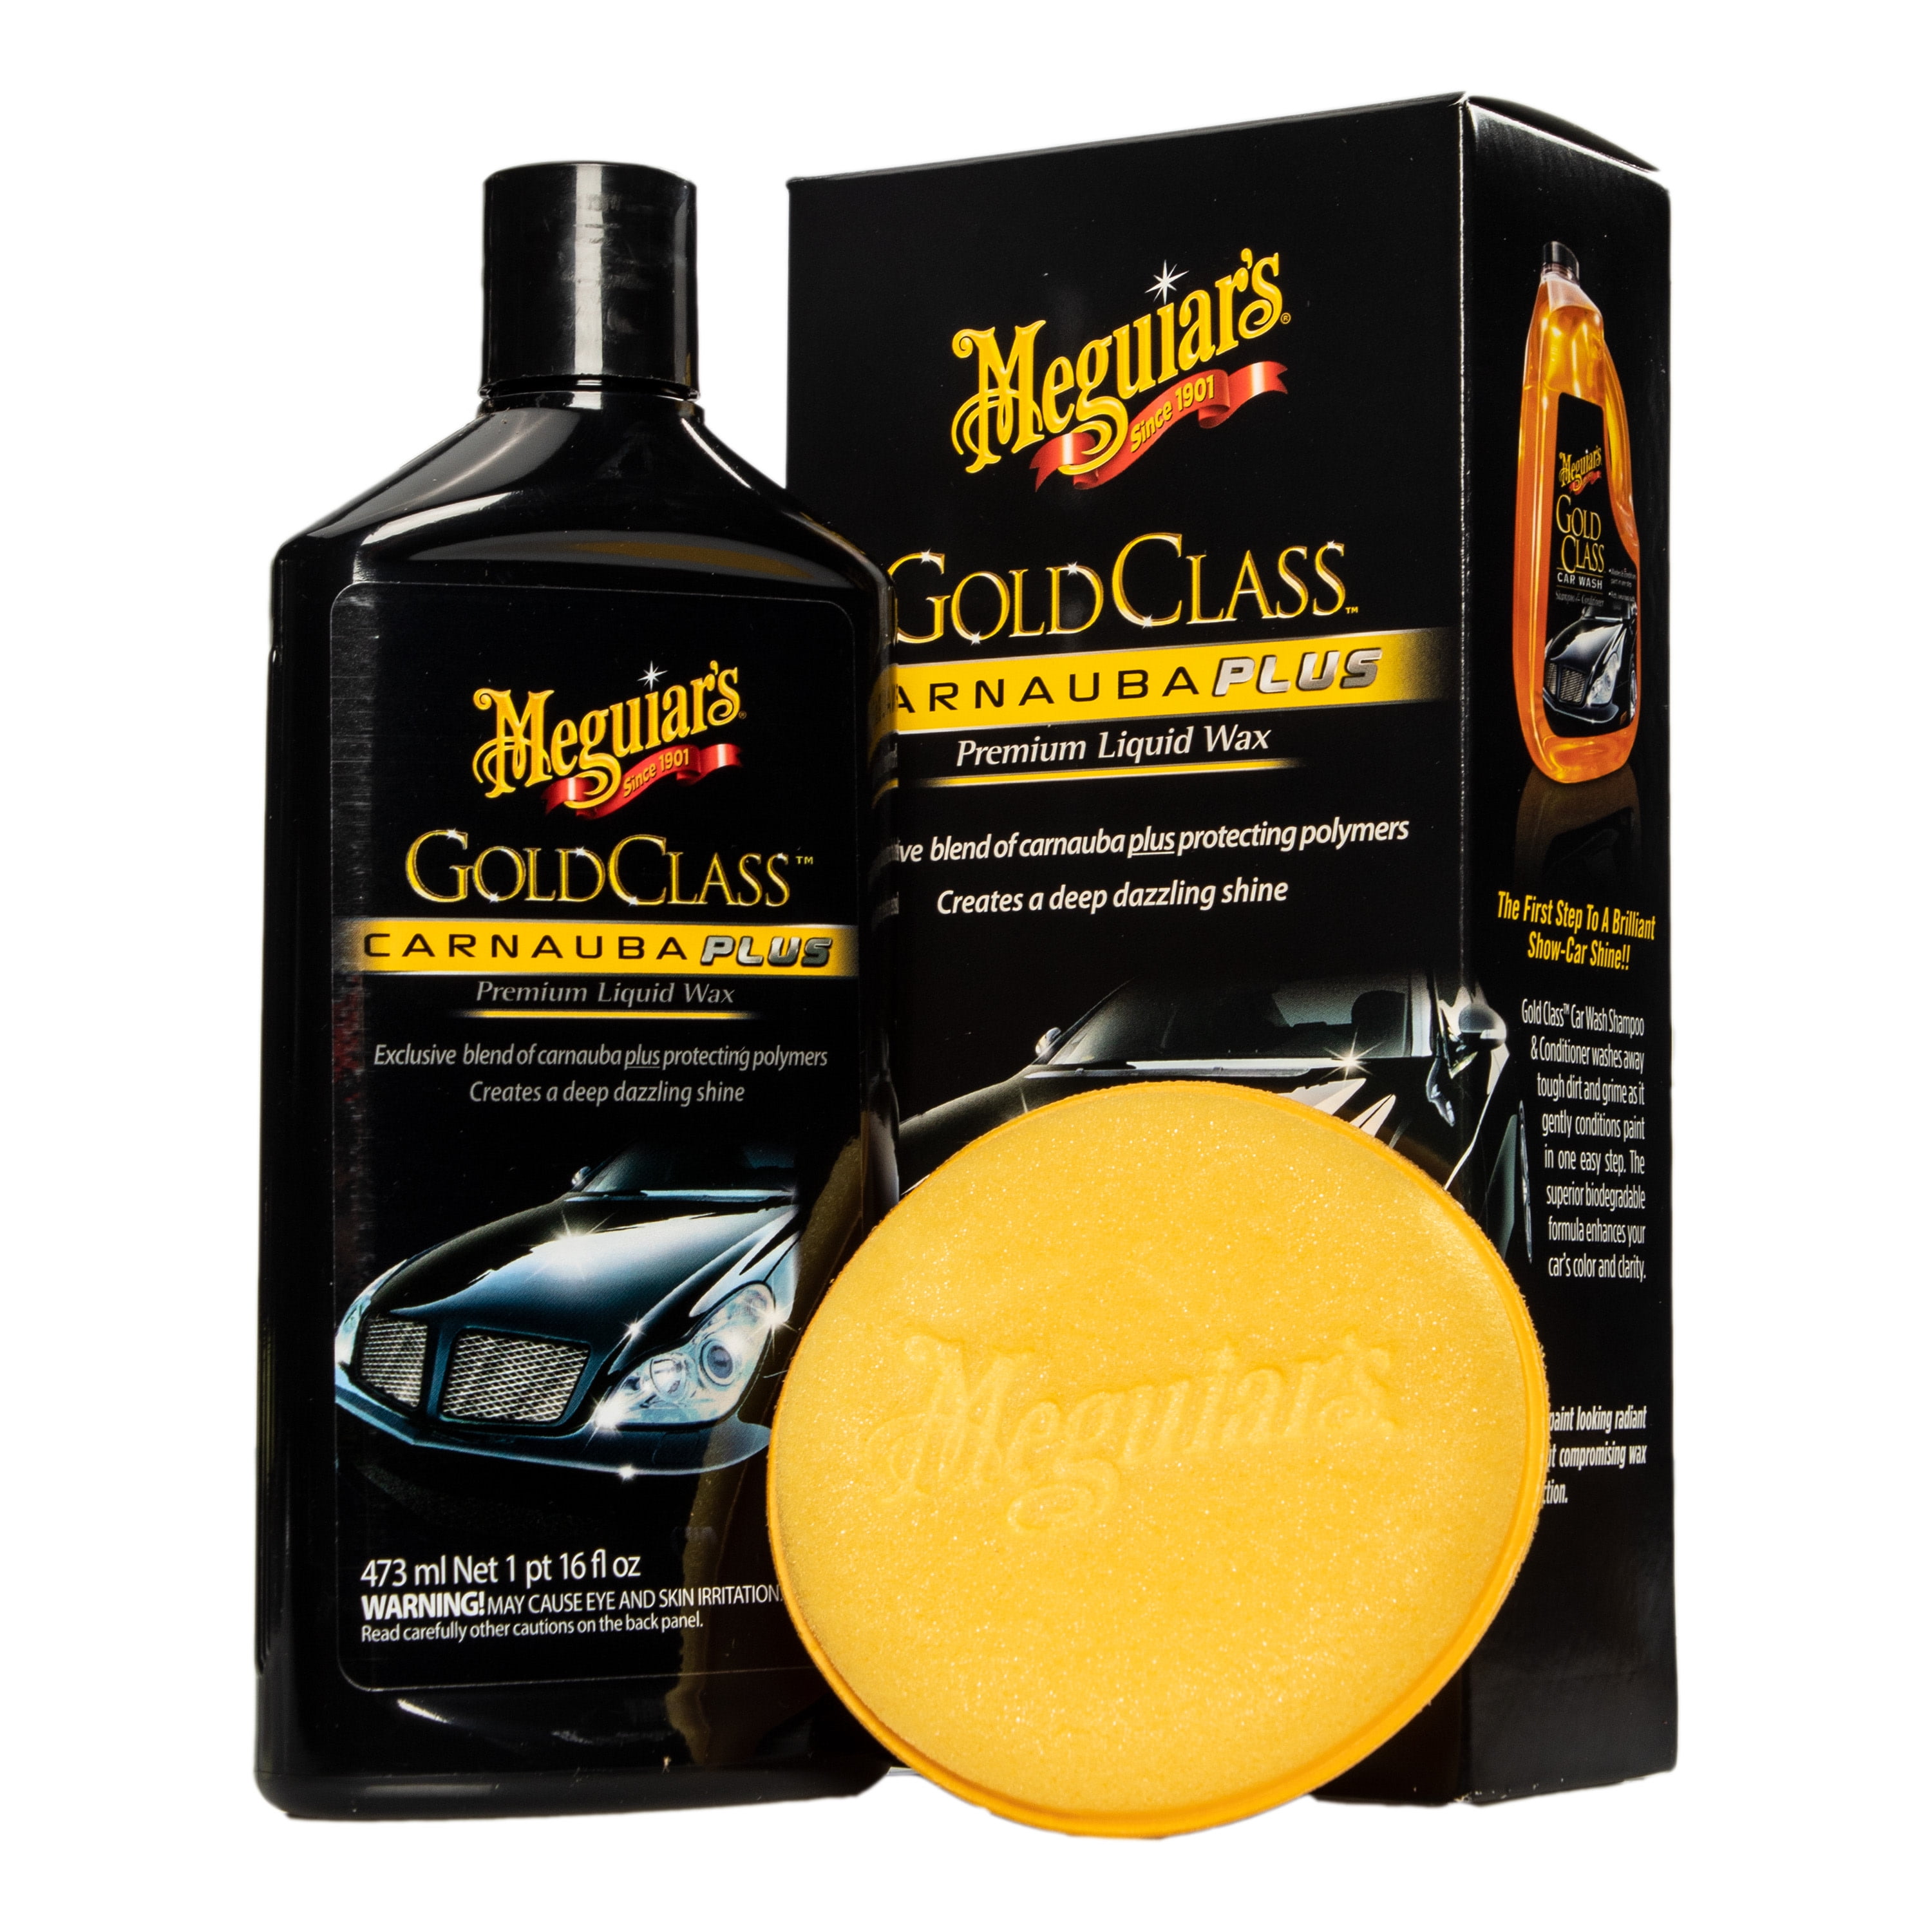 Meguiars Gold Class Car Wash test results and review on my 2009